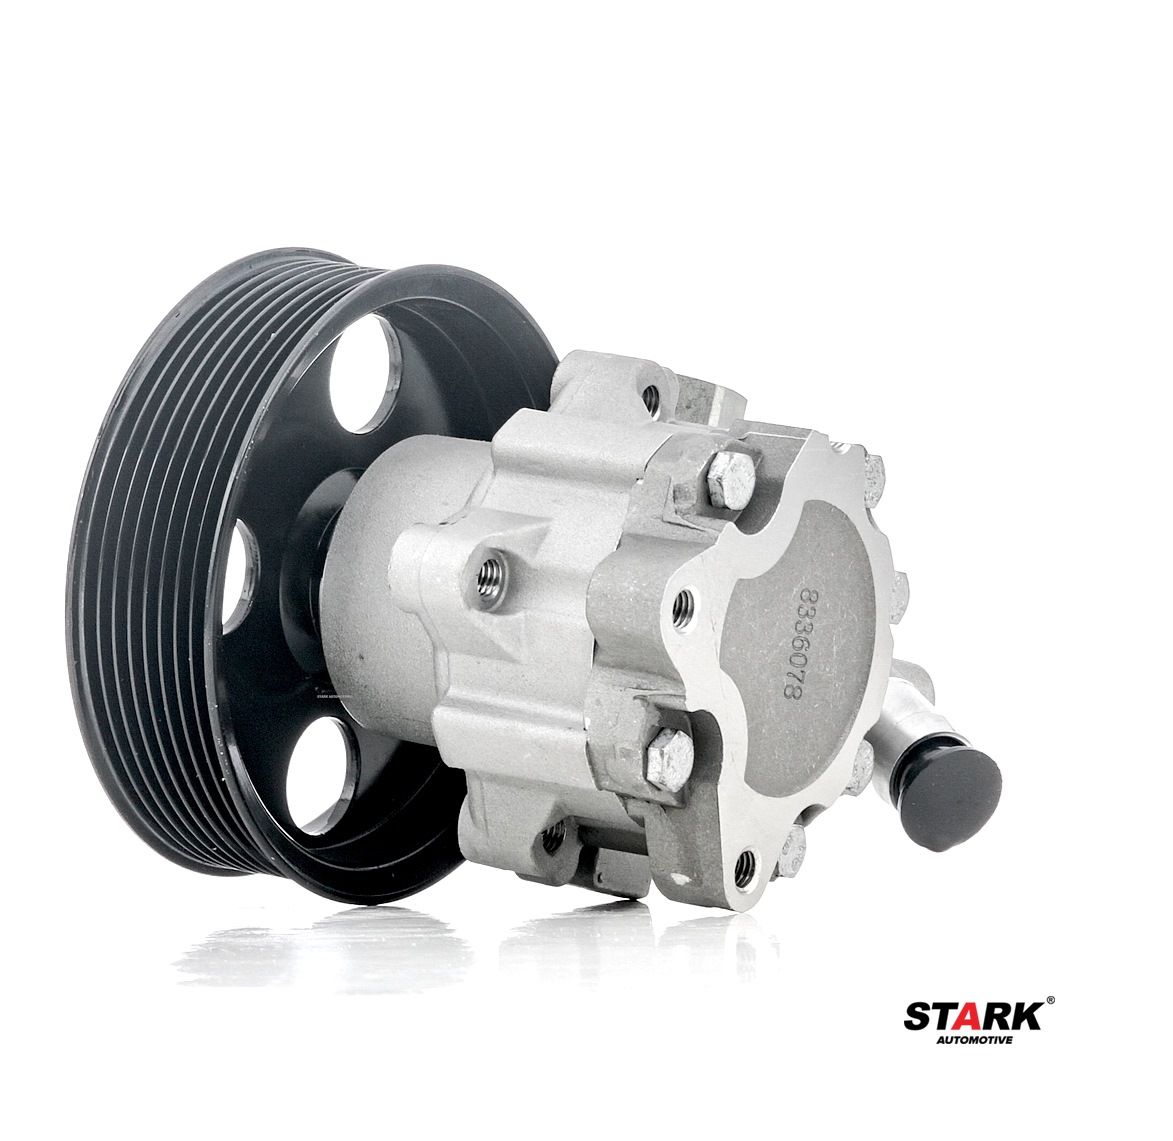 STARK SKHP-0540099 Power steering pump Hydraulic, 128 bar, Number of ribs: 8, Belt Pulley Ø: 120 mm, 80 l/h